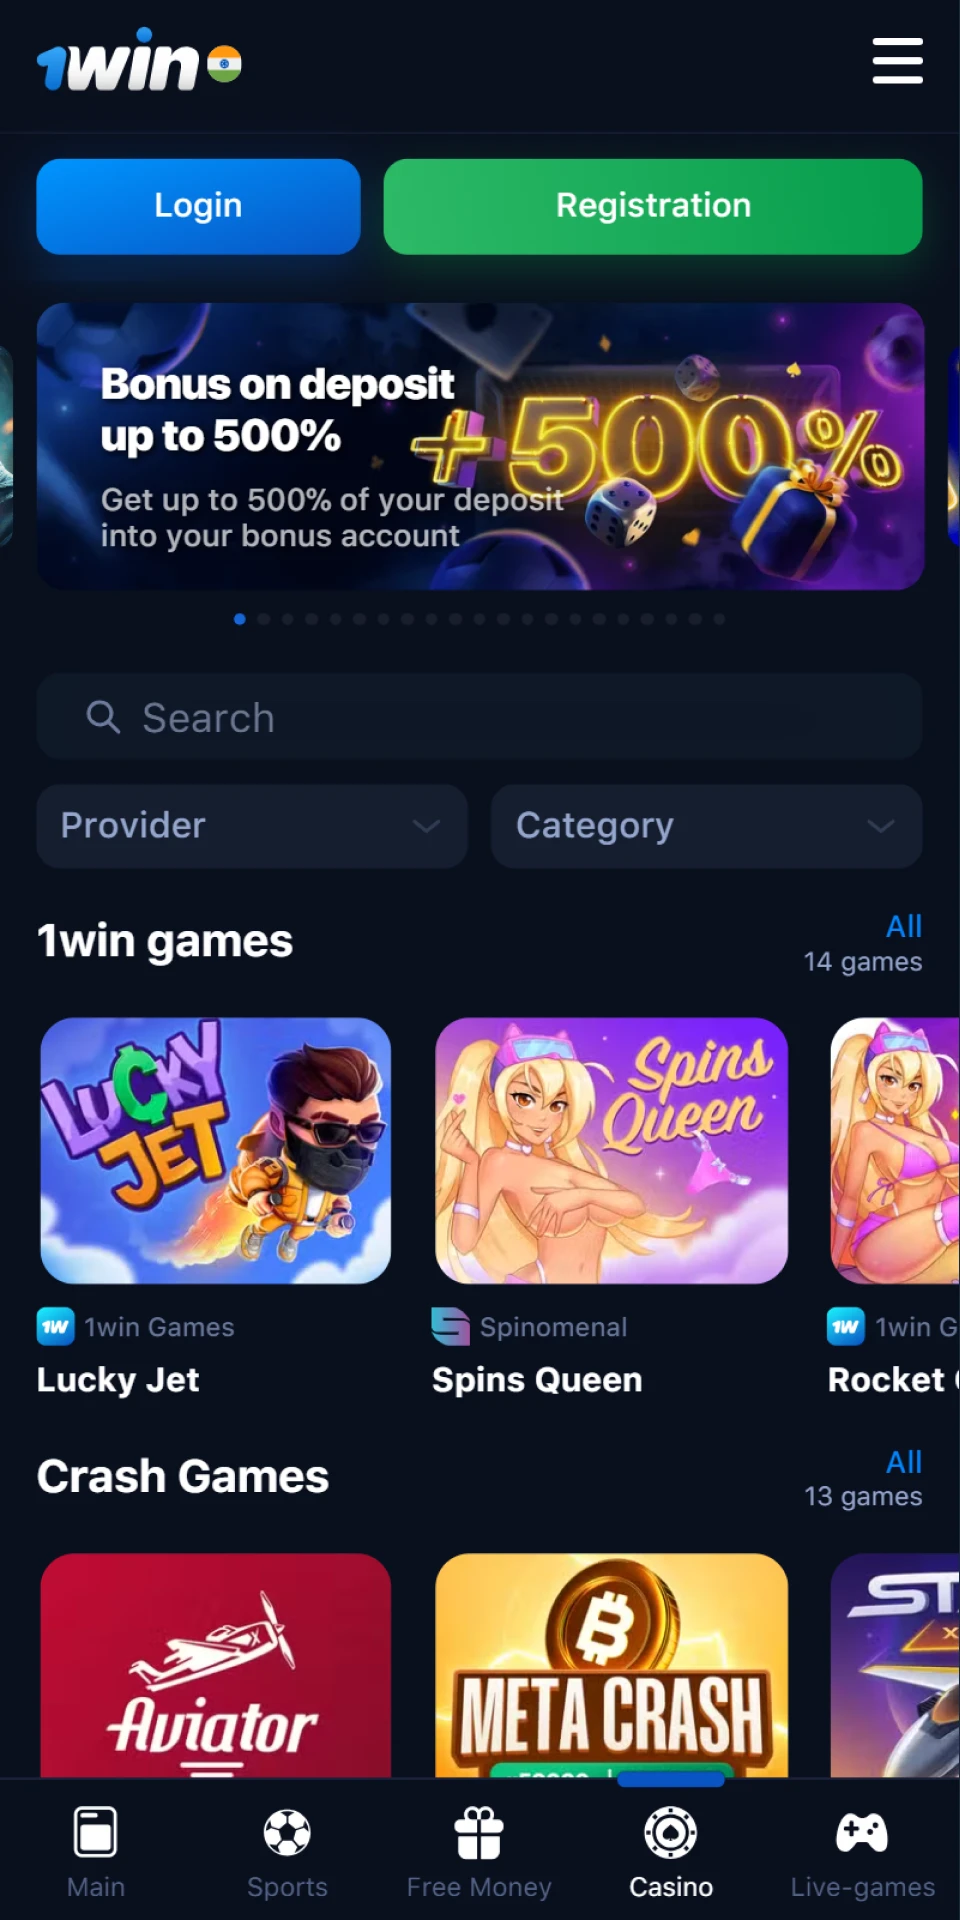 In the 1Win app, play in the casino and win big.